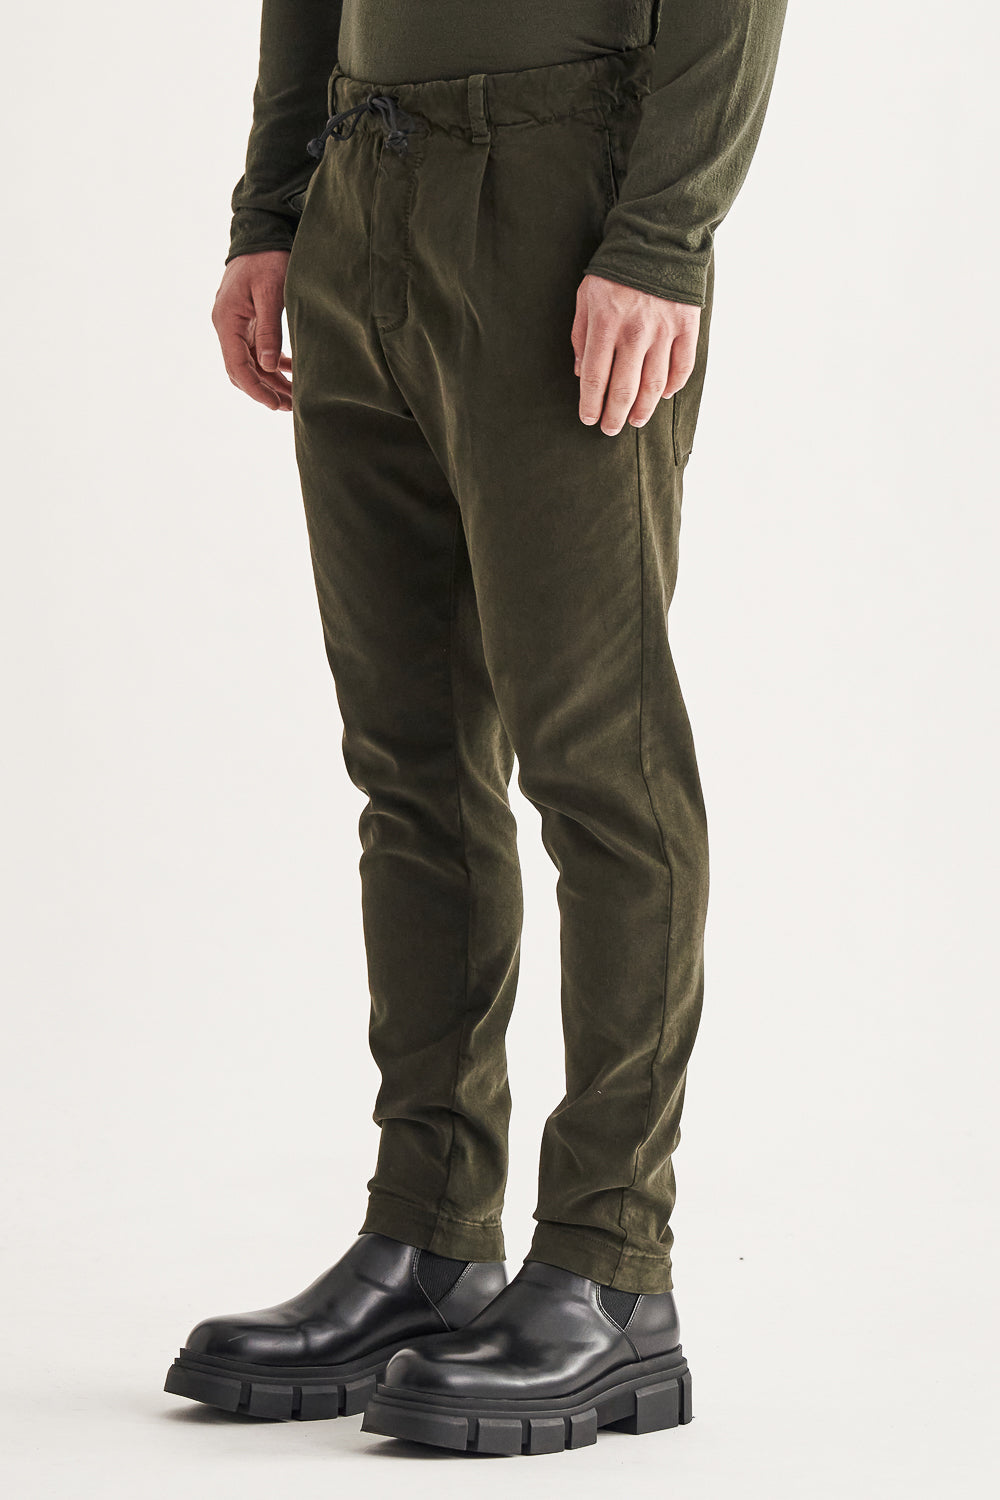 Buy the Transit Loose Fit Stretch Jogging Chinos in Khaki at Intro. Spend £50 for free UK delivery. Official stockists. We ship worldwide.